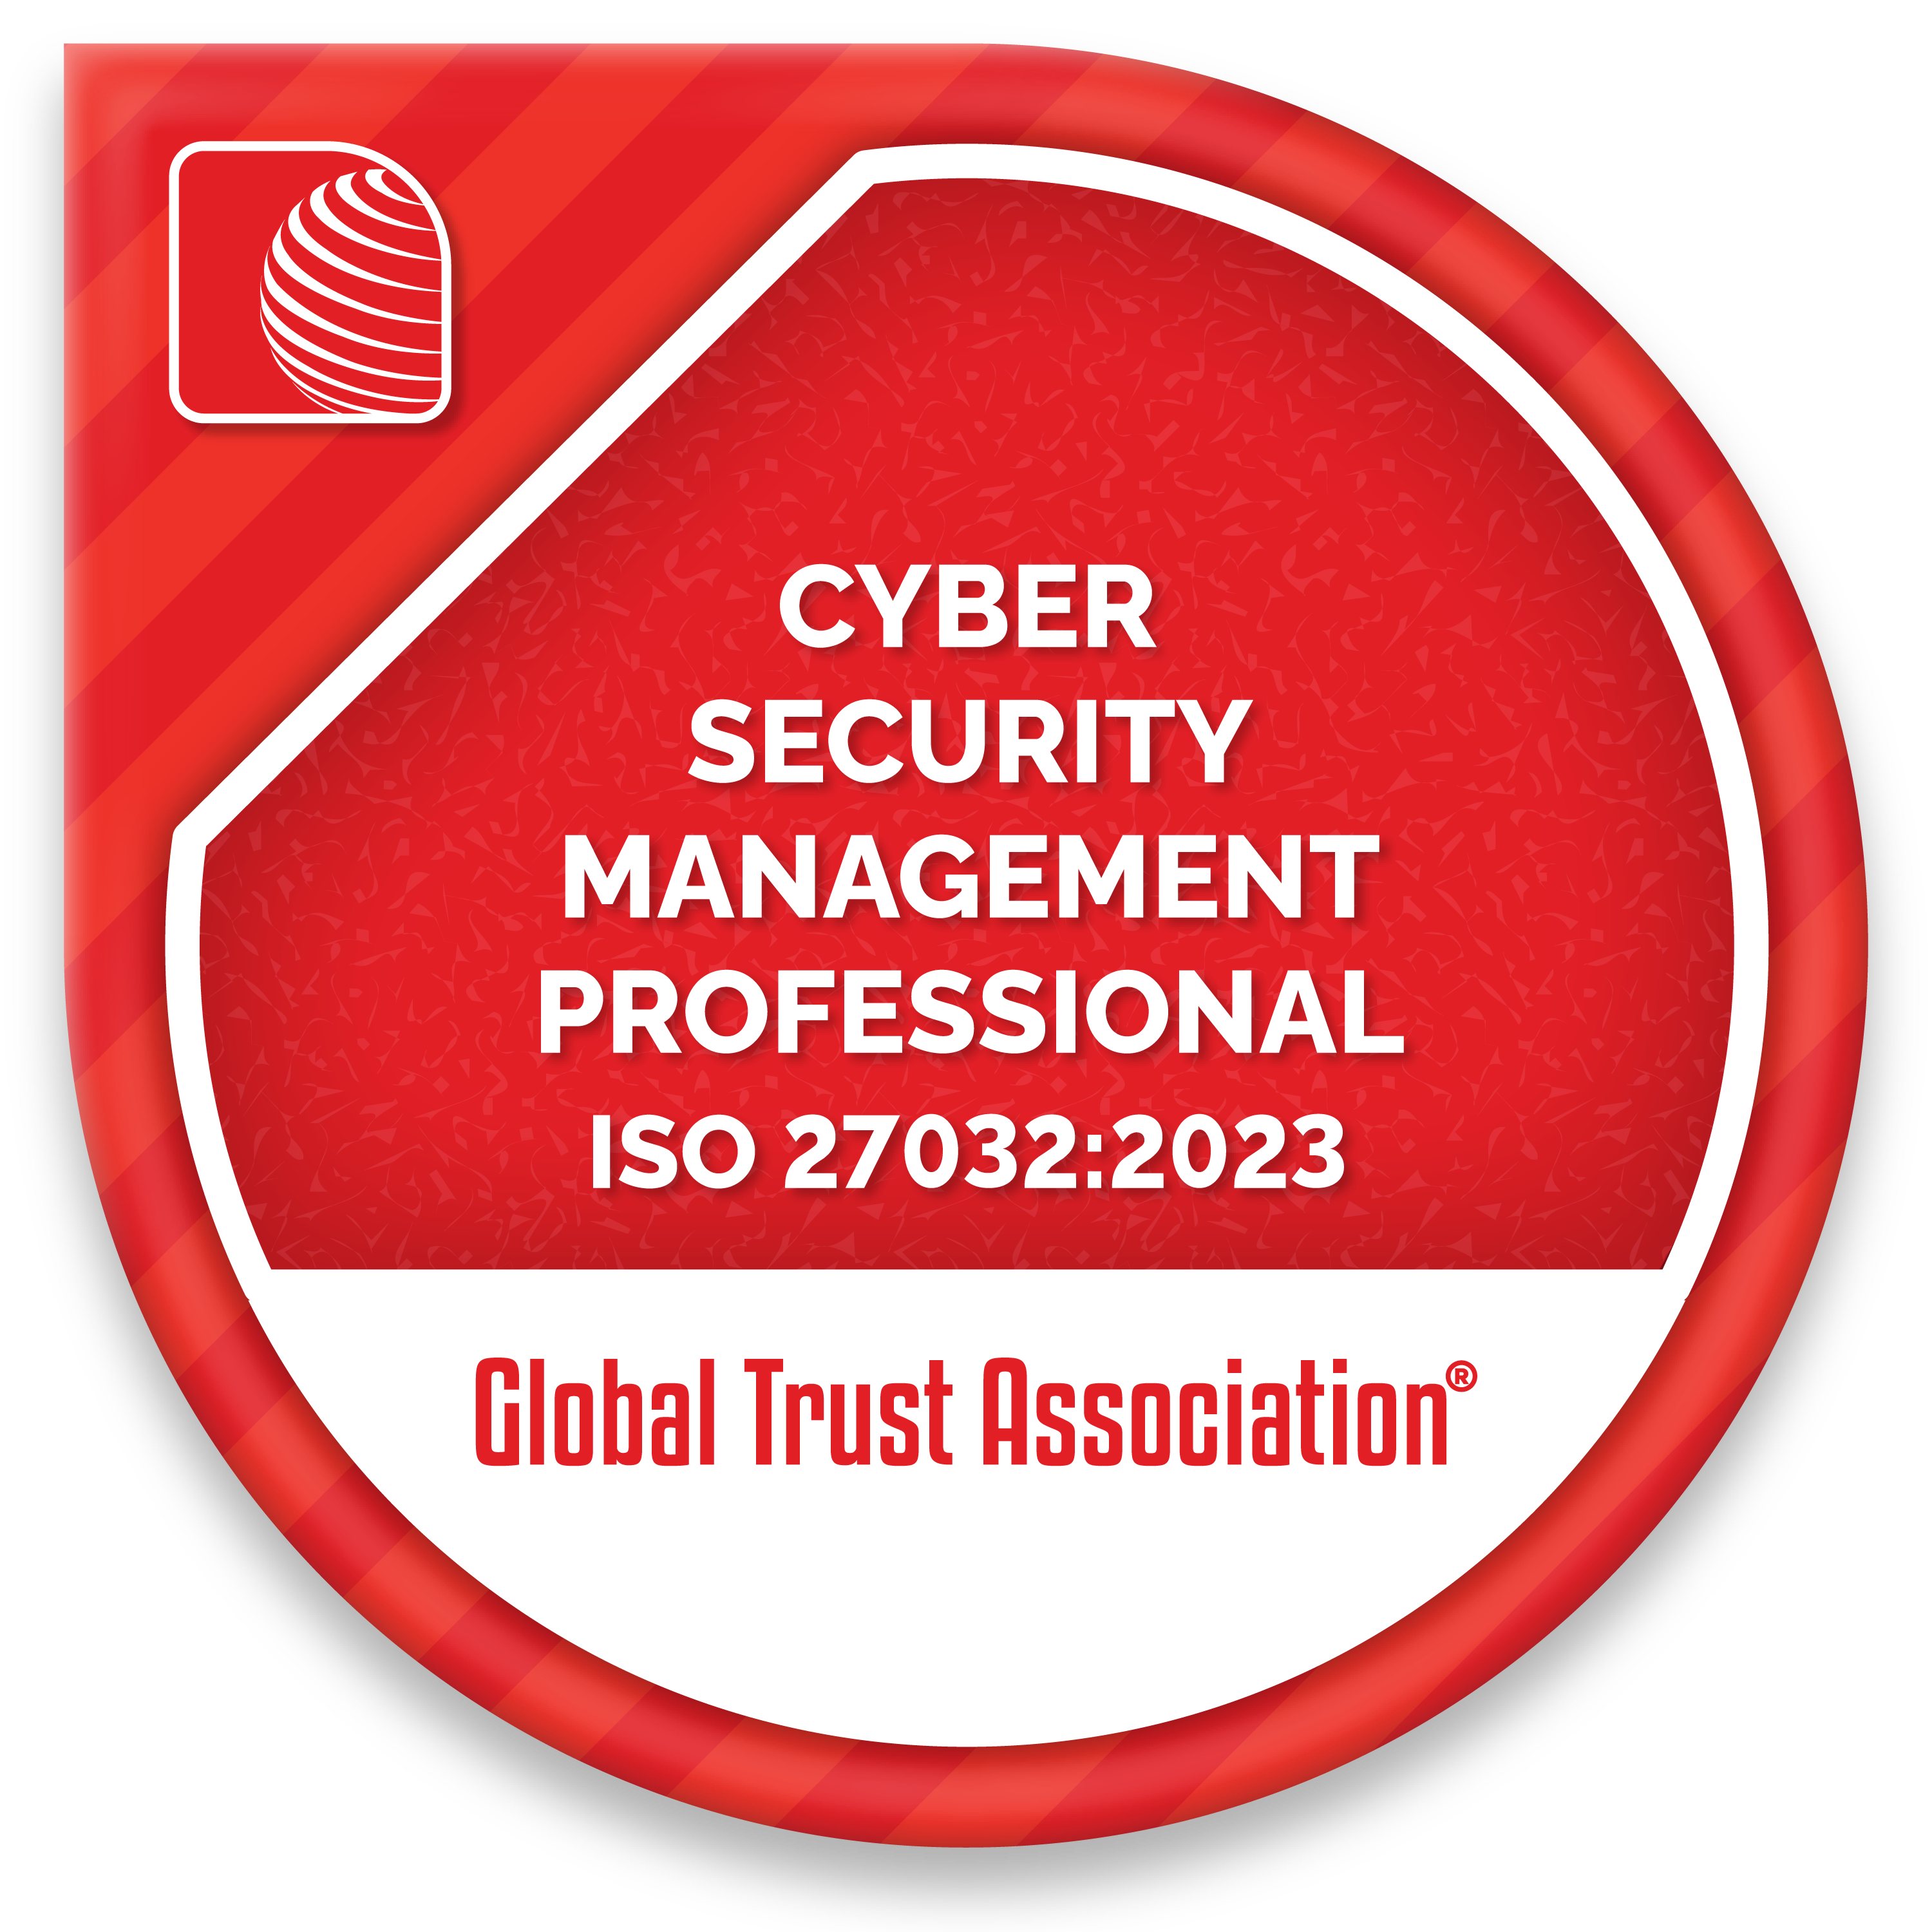 Certified Cyber Security Management Professional (ISO27032:2023)